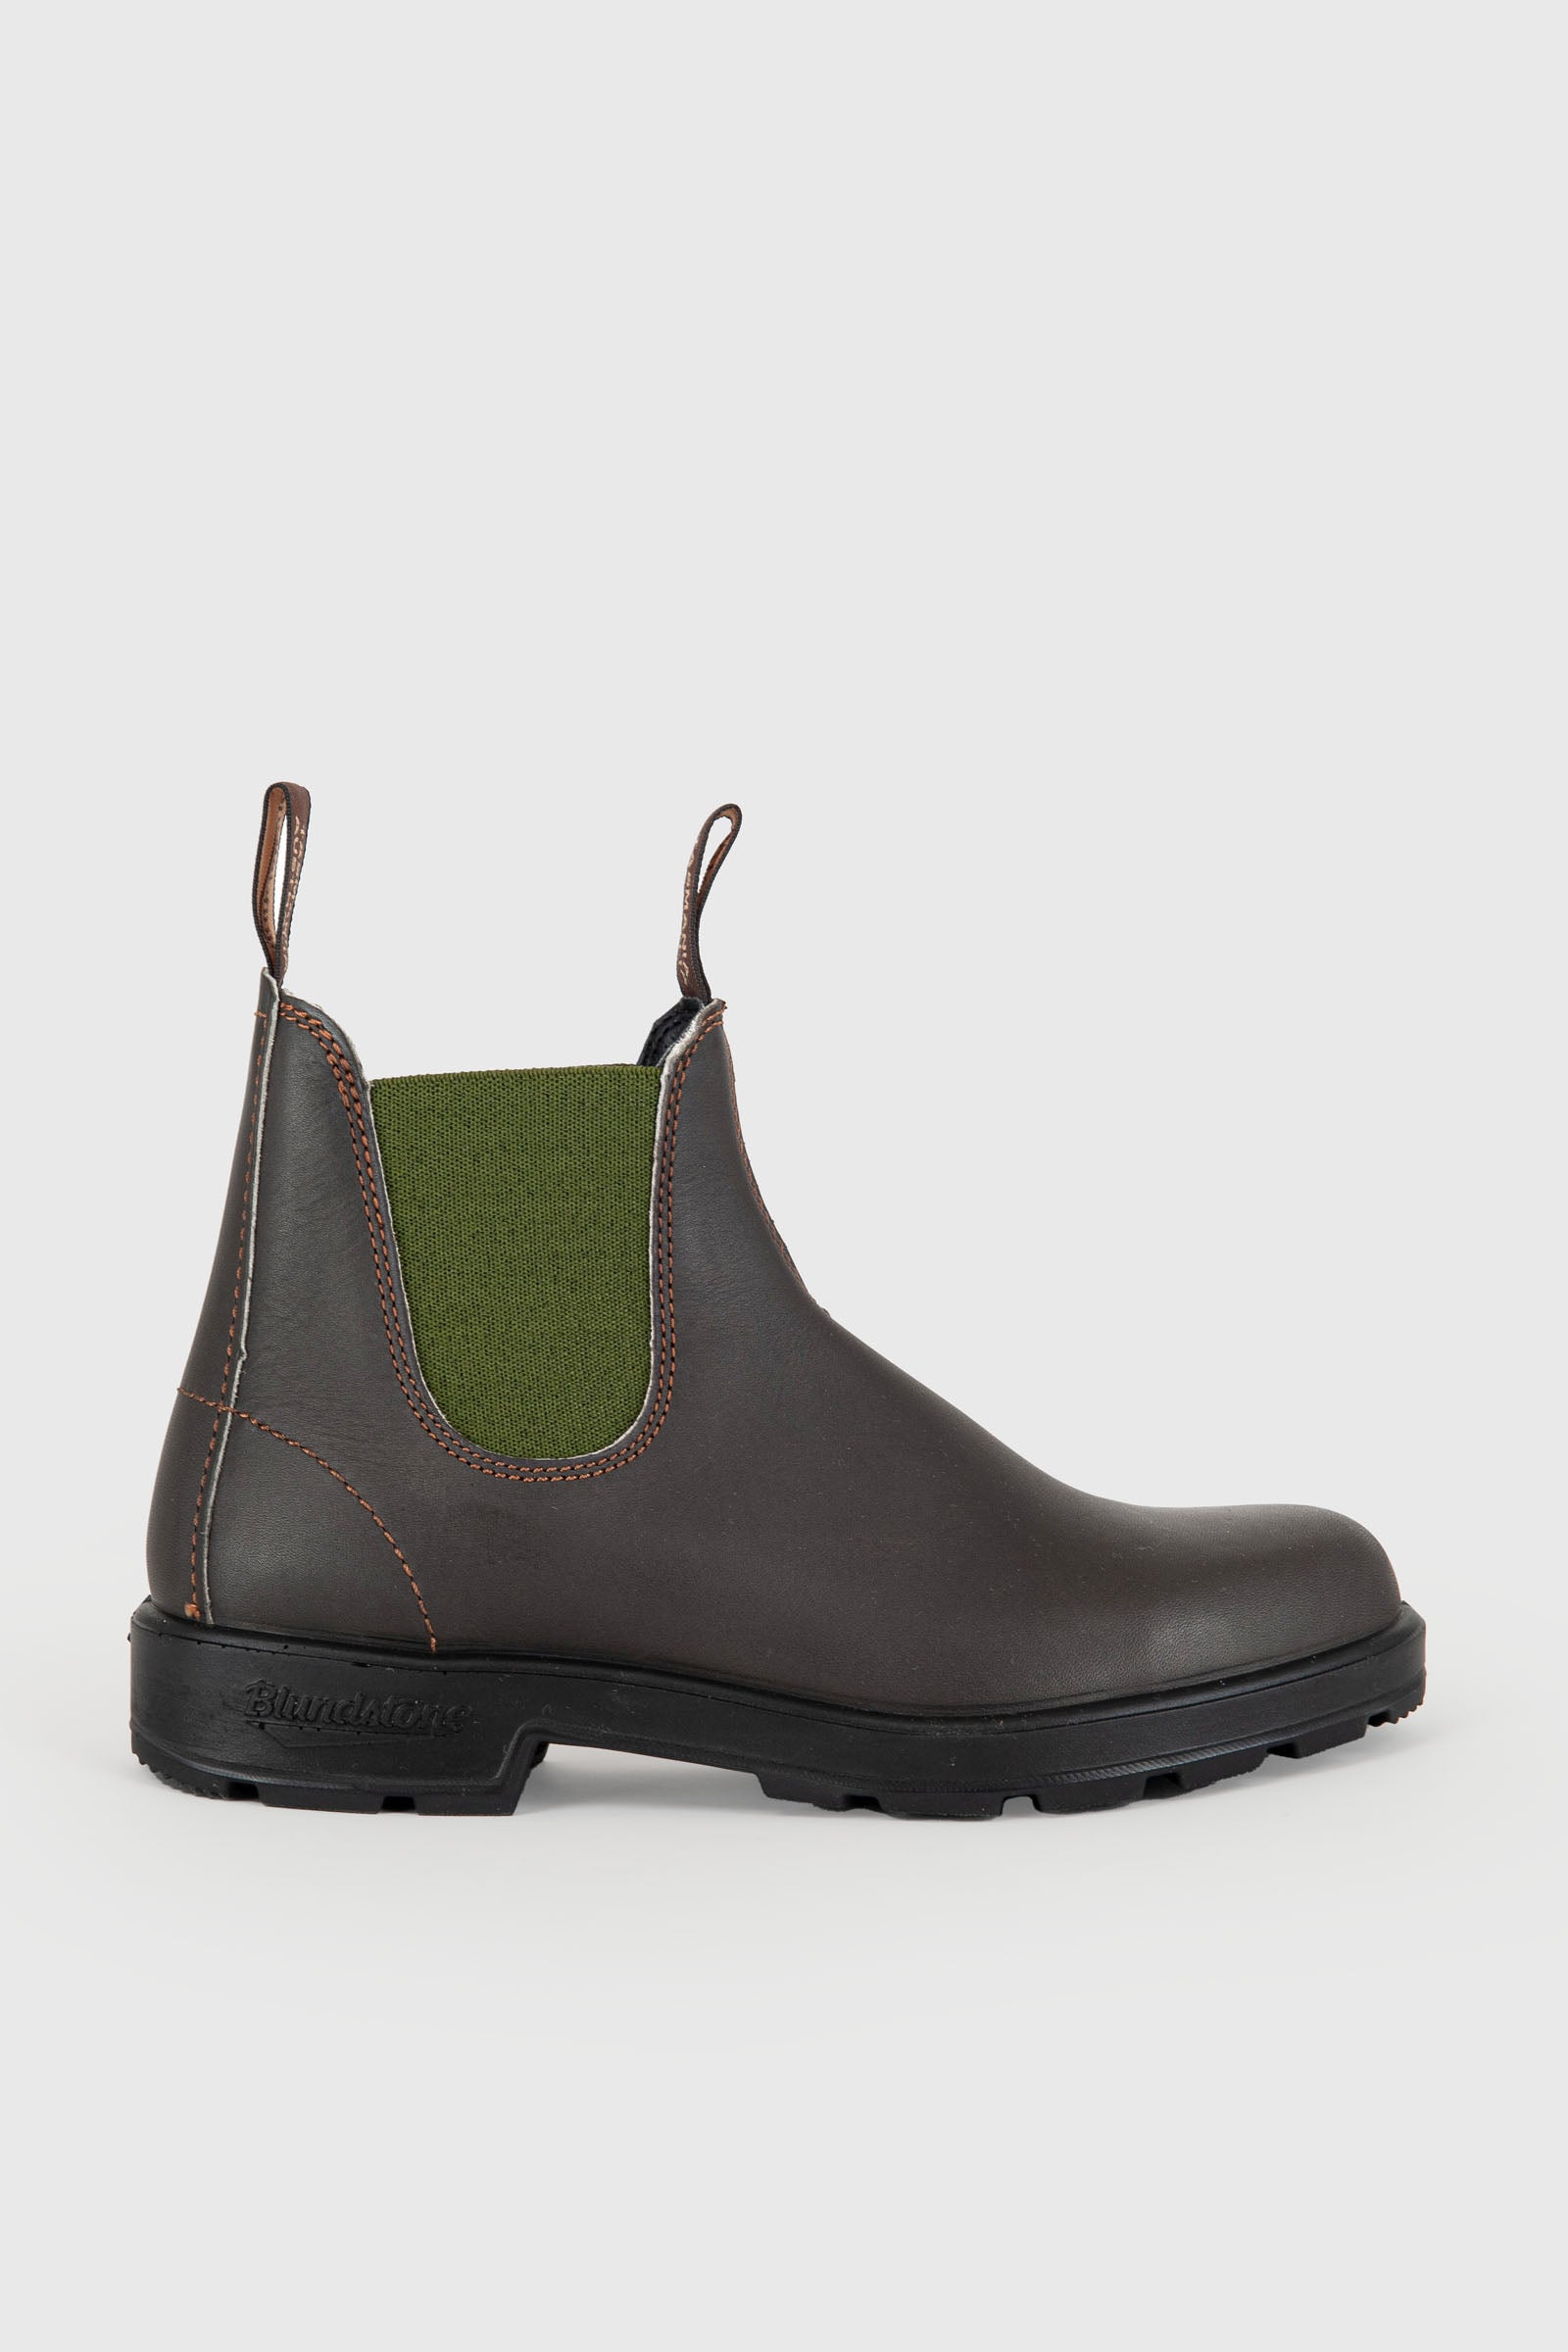 Blundstone Stivaletto Beatle 519 Pelle Stout Brown/Olive - 1